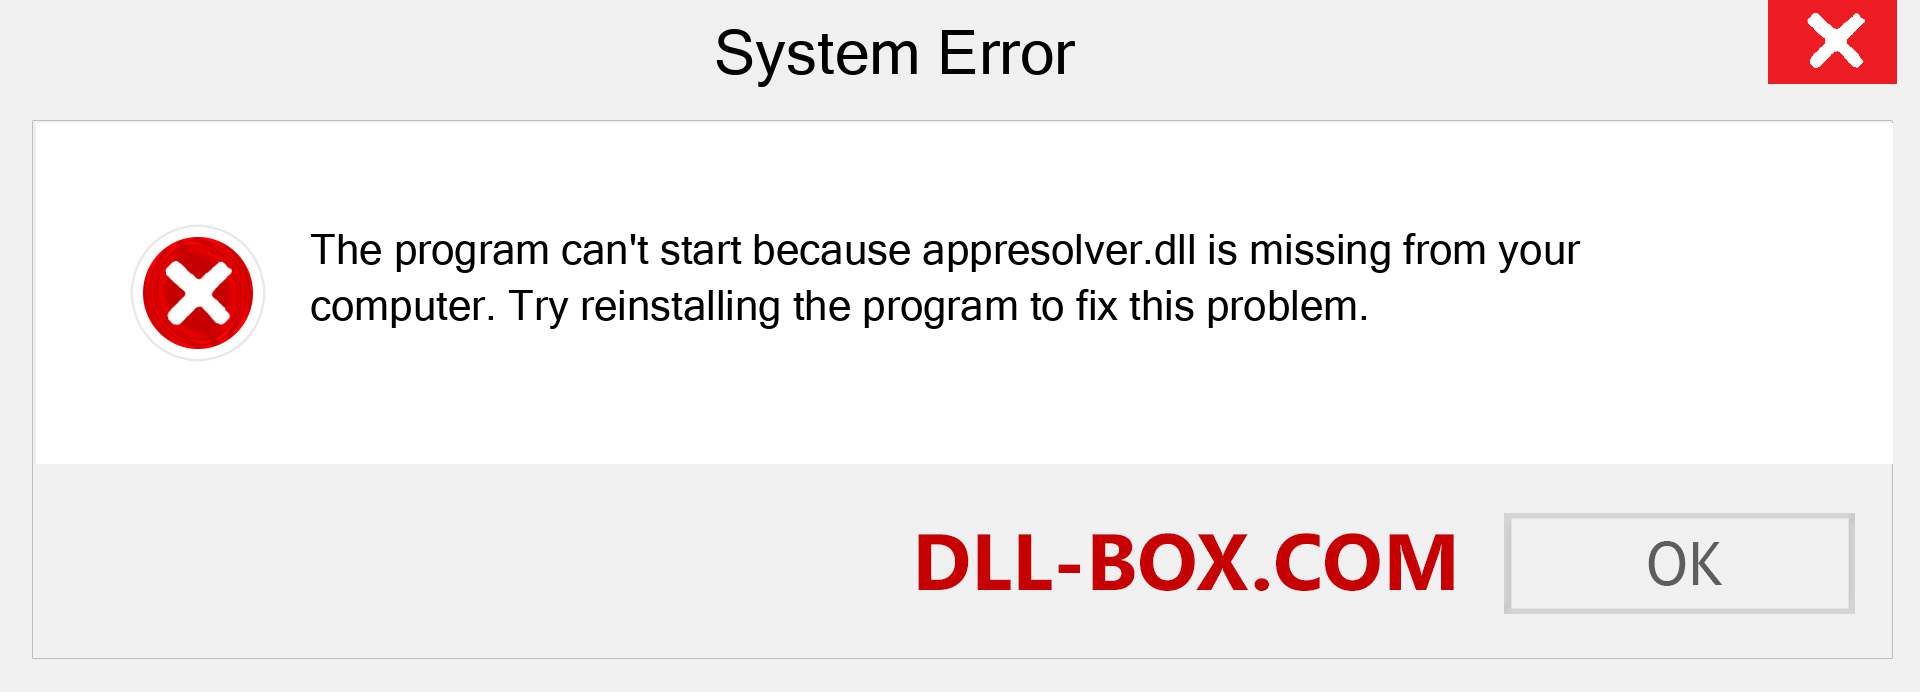  appresolver.dll file is missing?. Download for Windows 7, 8, 10 - Fix  appresolver dll Missing Error on Windows, photos, images